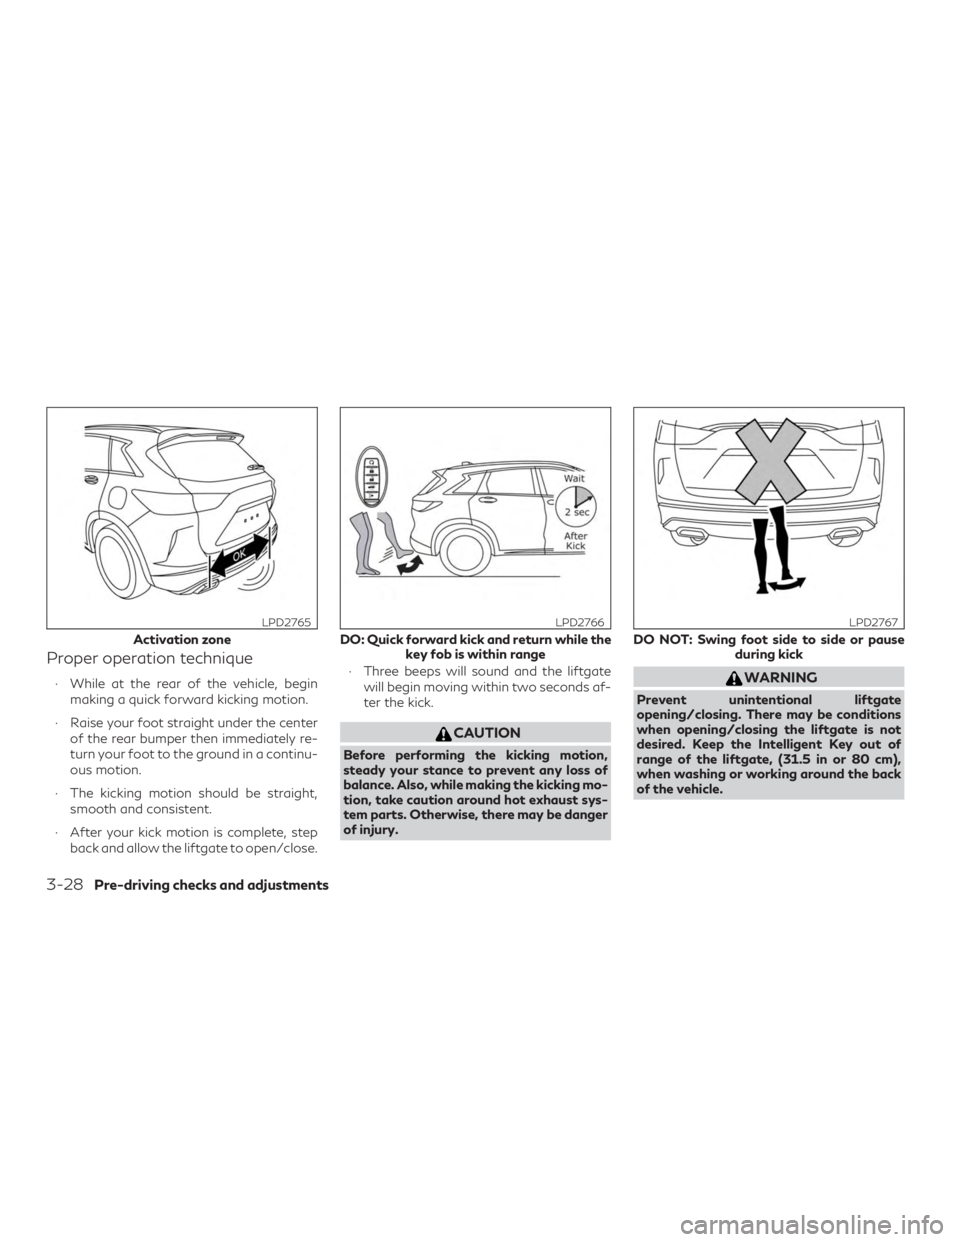 INFINITI QX50 2019  Owners Manual Proper operation technique
∙ While at the rear of the vehicle, beginmaking a quick forward kicking motion.
∙ Raise your foot straight under the center of the rear bumper then immediately re-
turn 